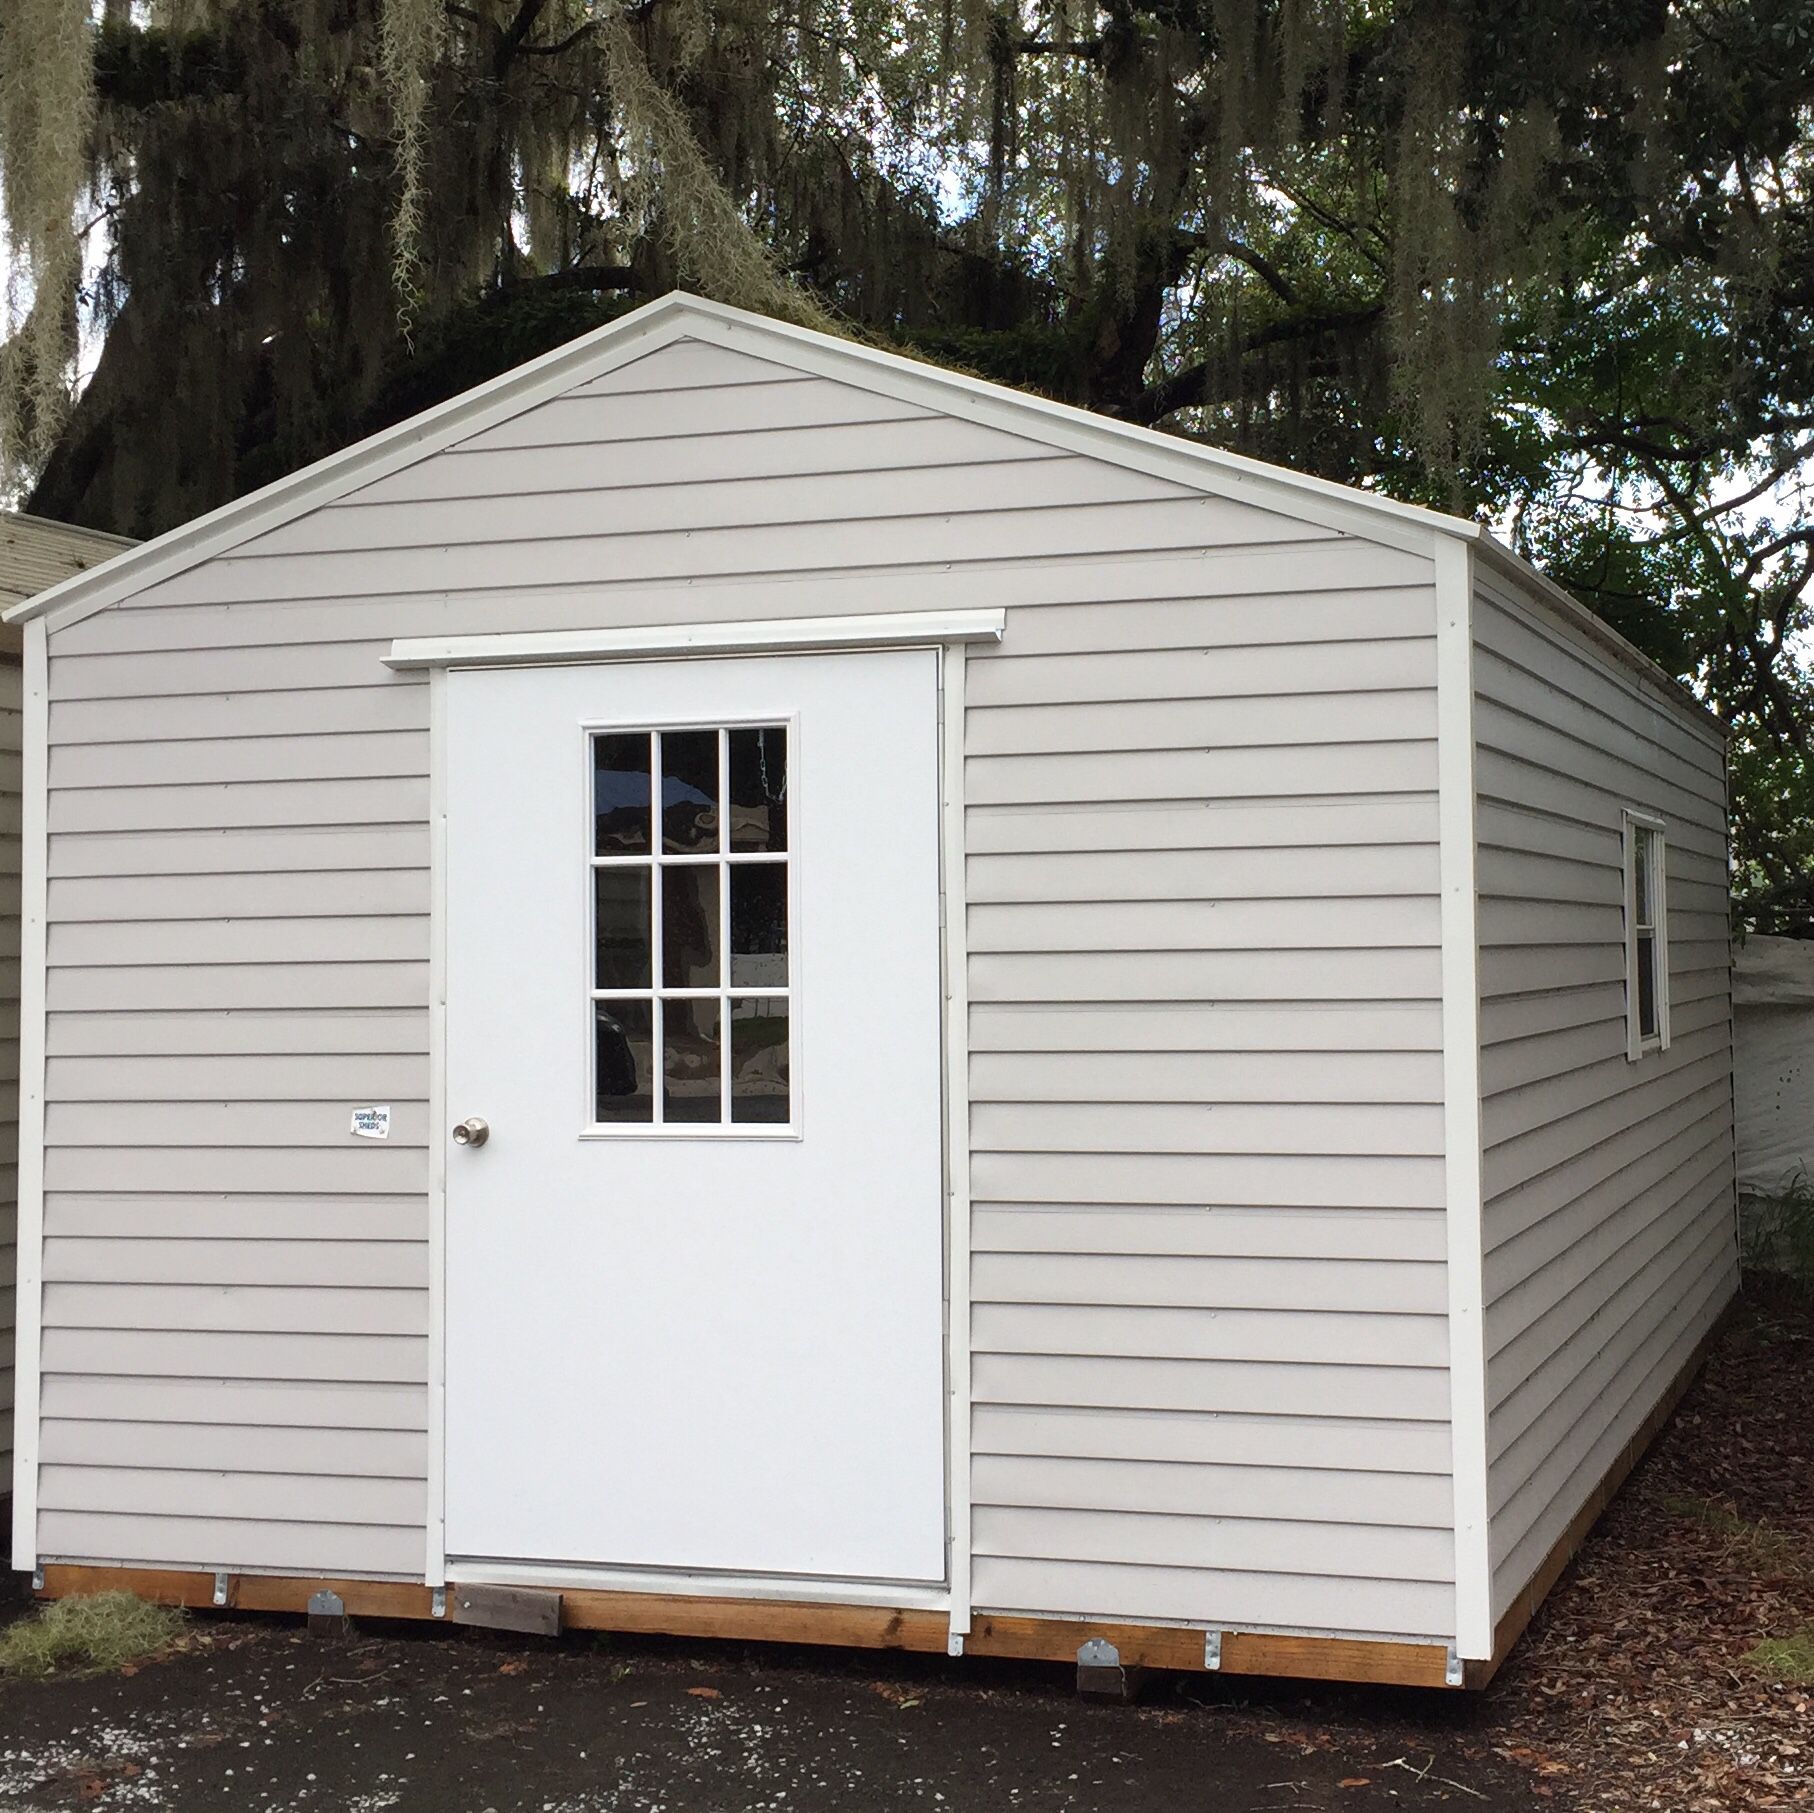 New 12x20 Shed 5% OFF!